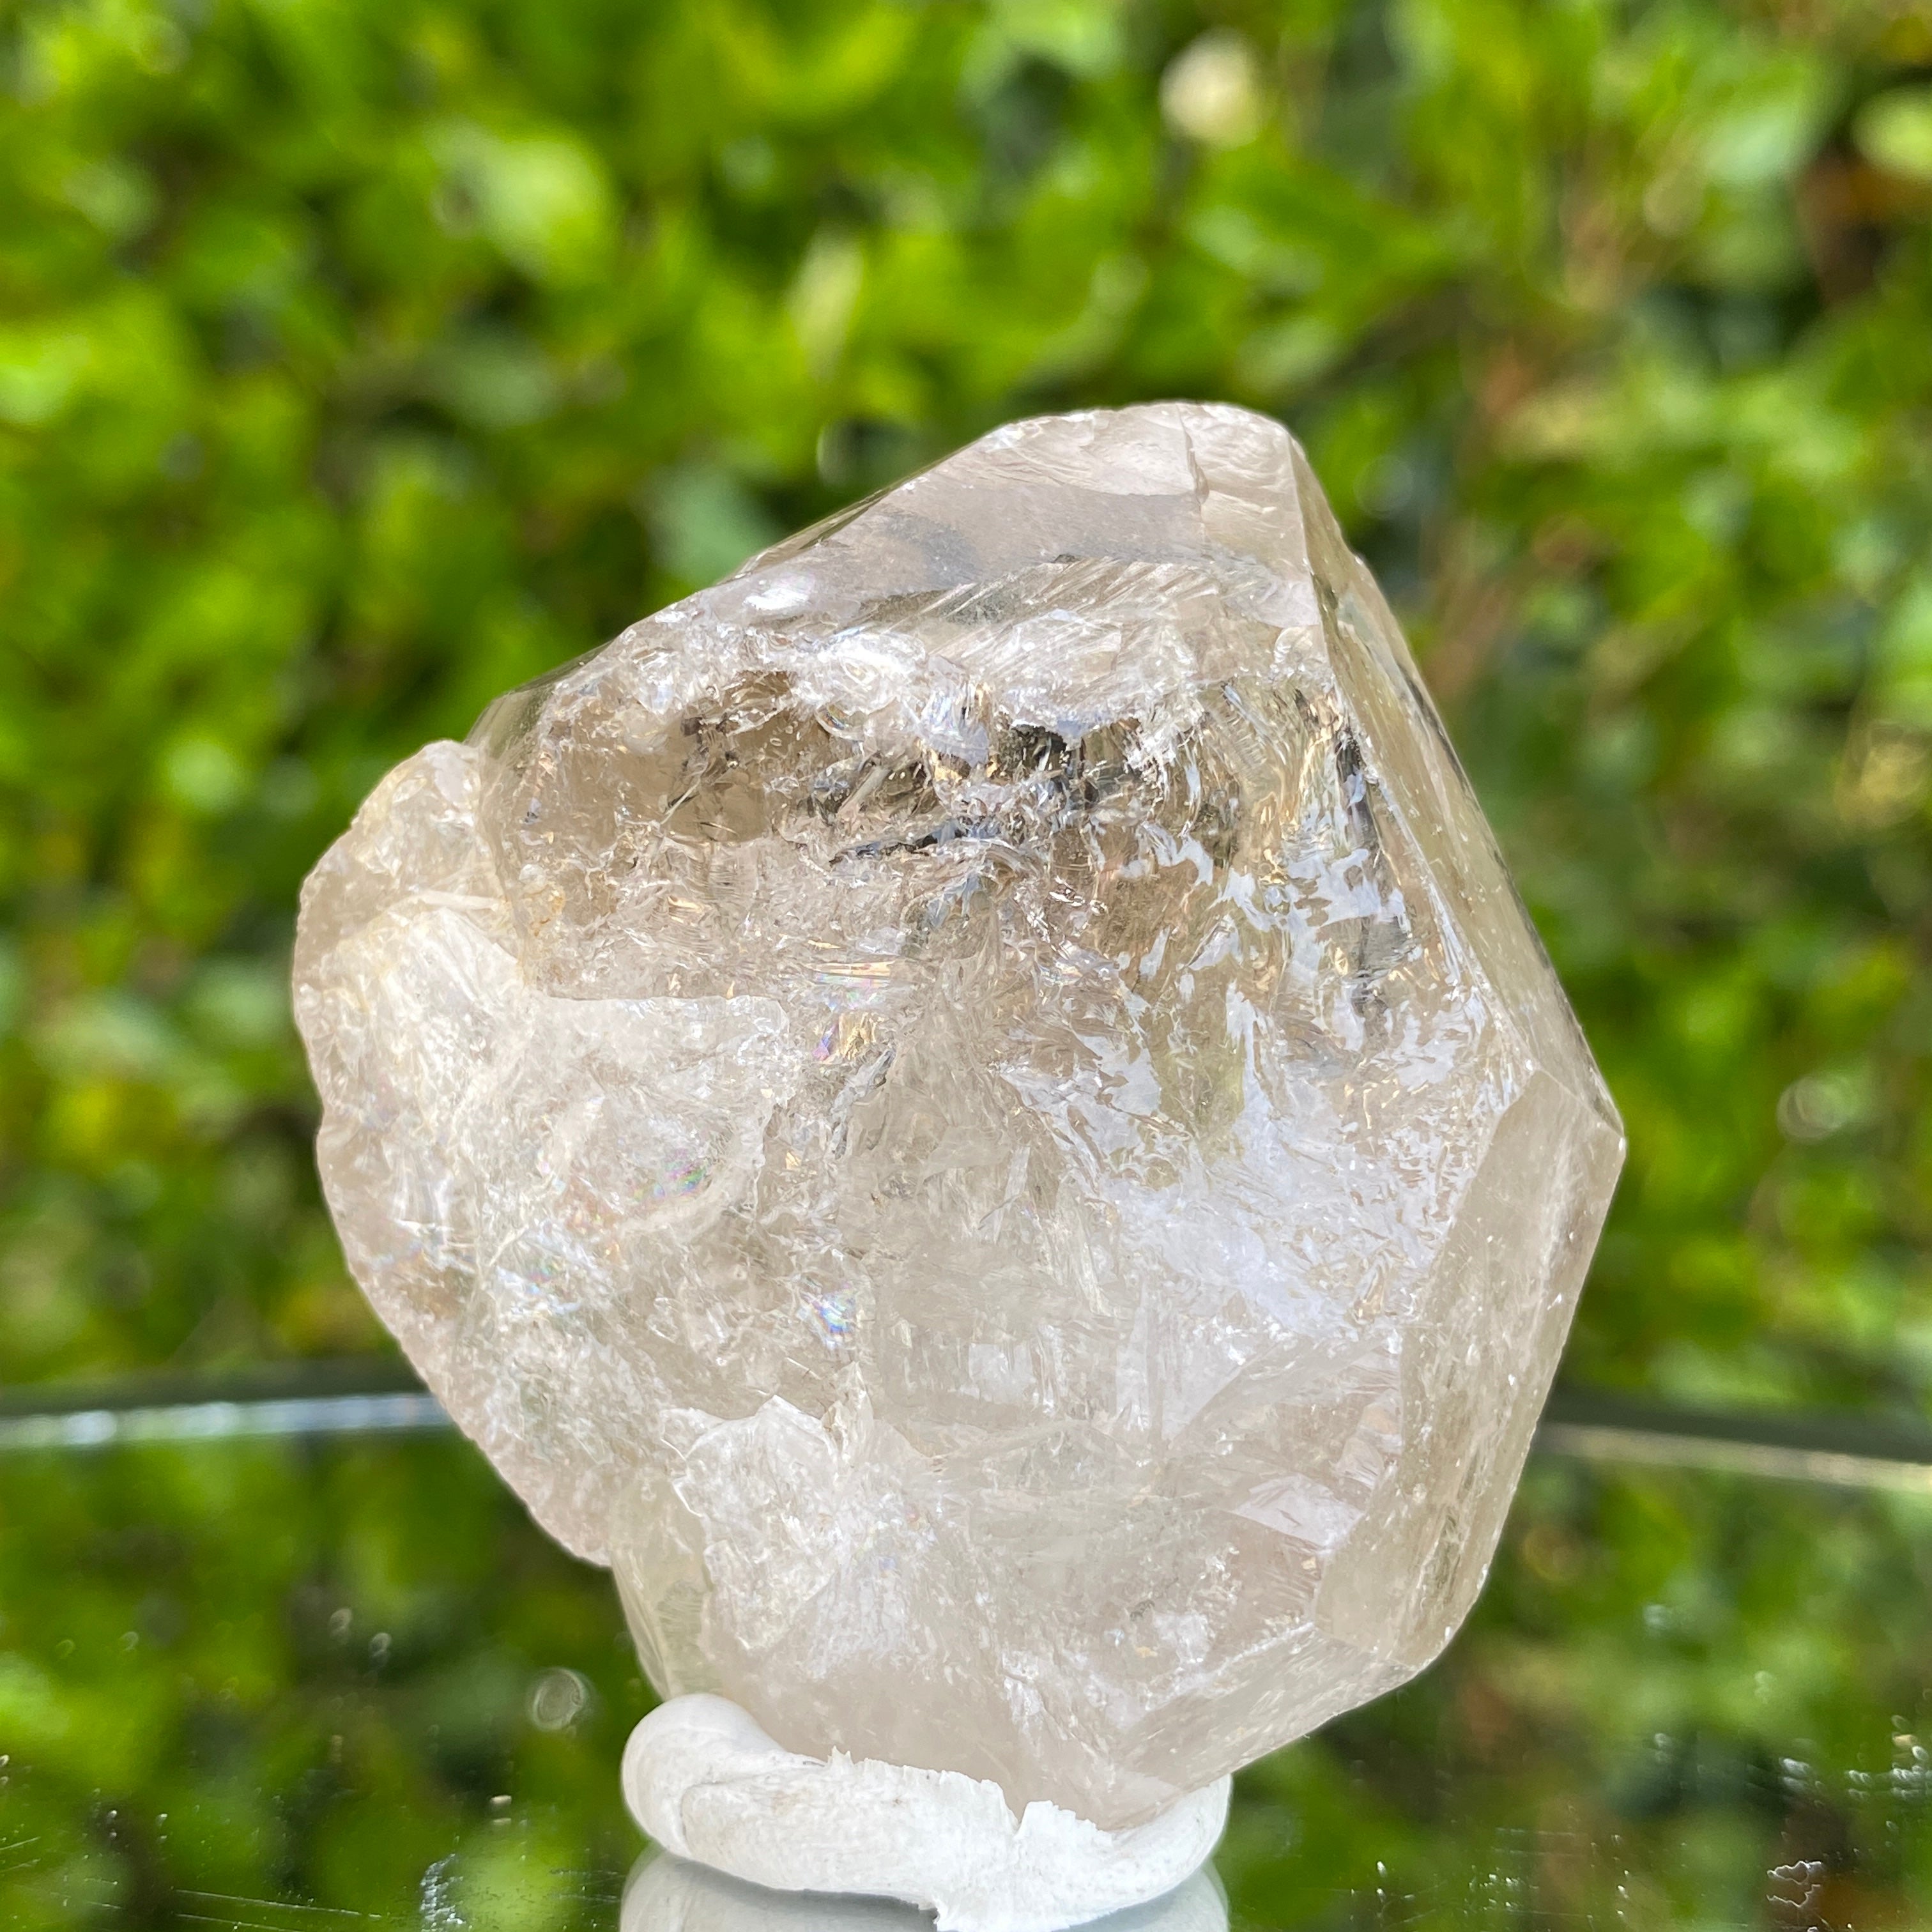 82g 5.5x5x3.5cm Water Bubble Clear Quartz from China